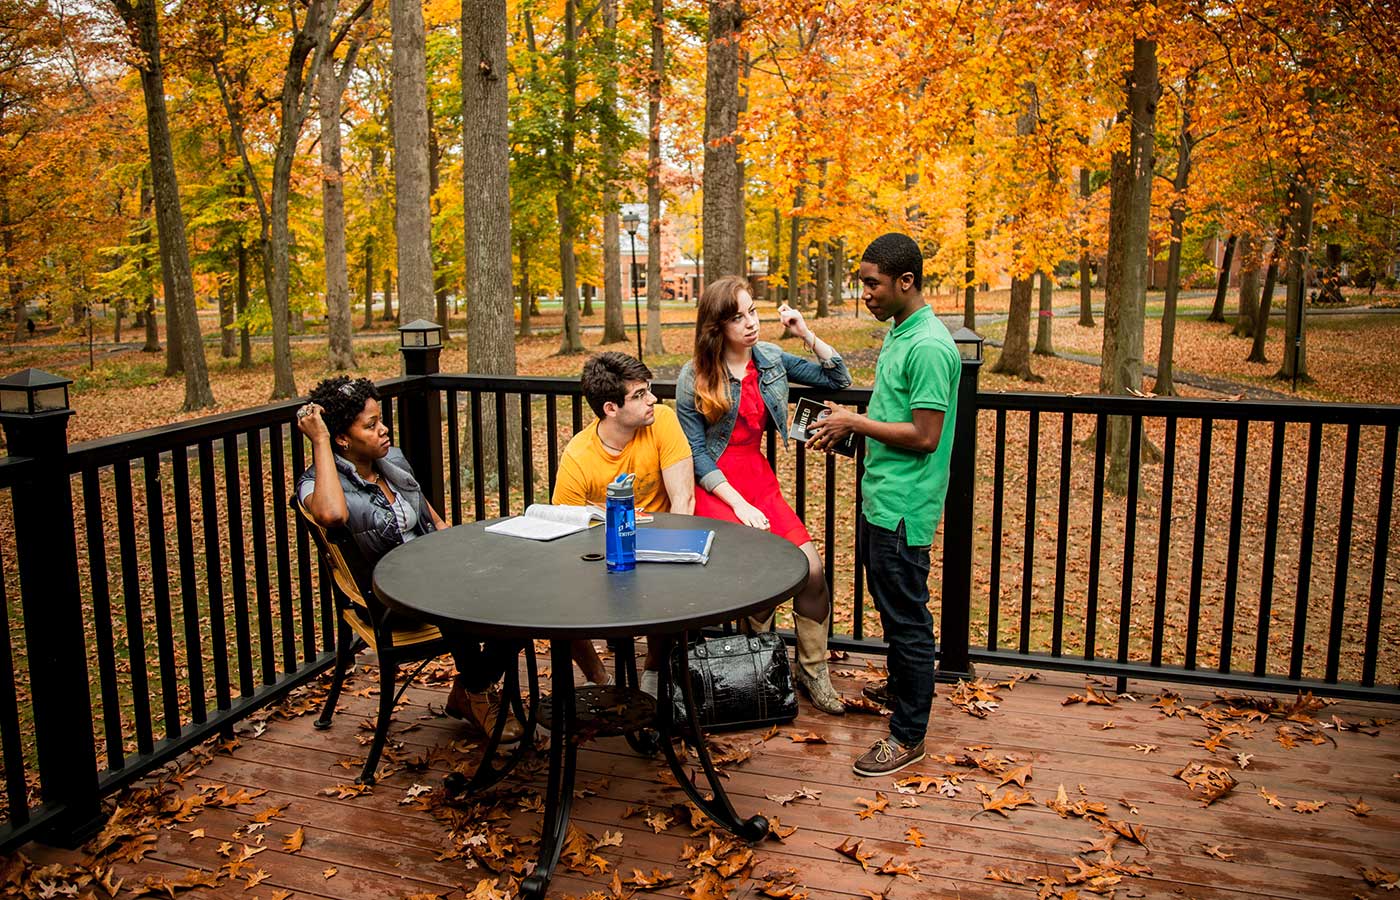 Study among the trees in The Forest at Drew University